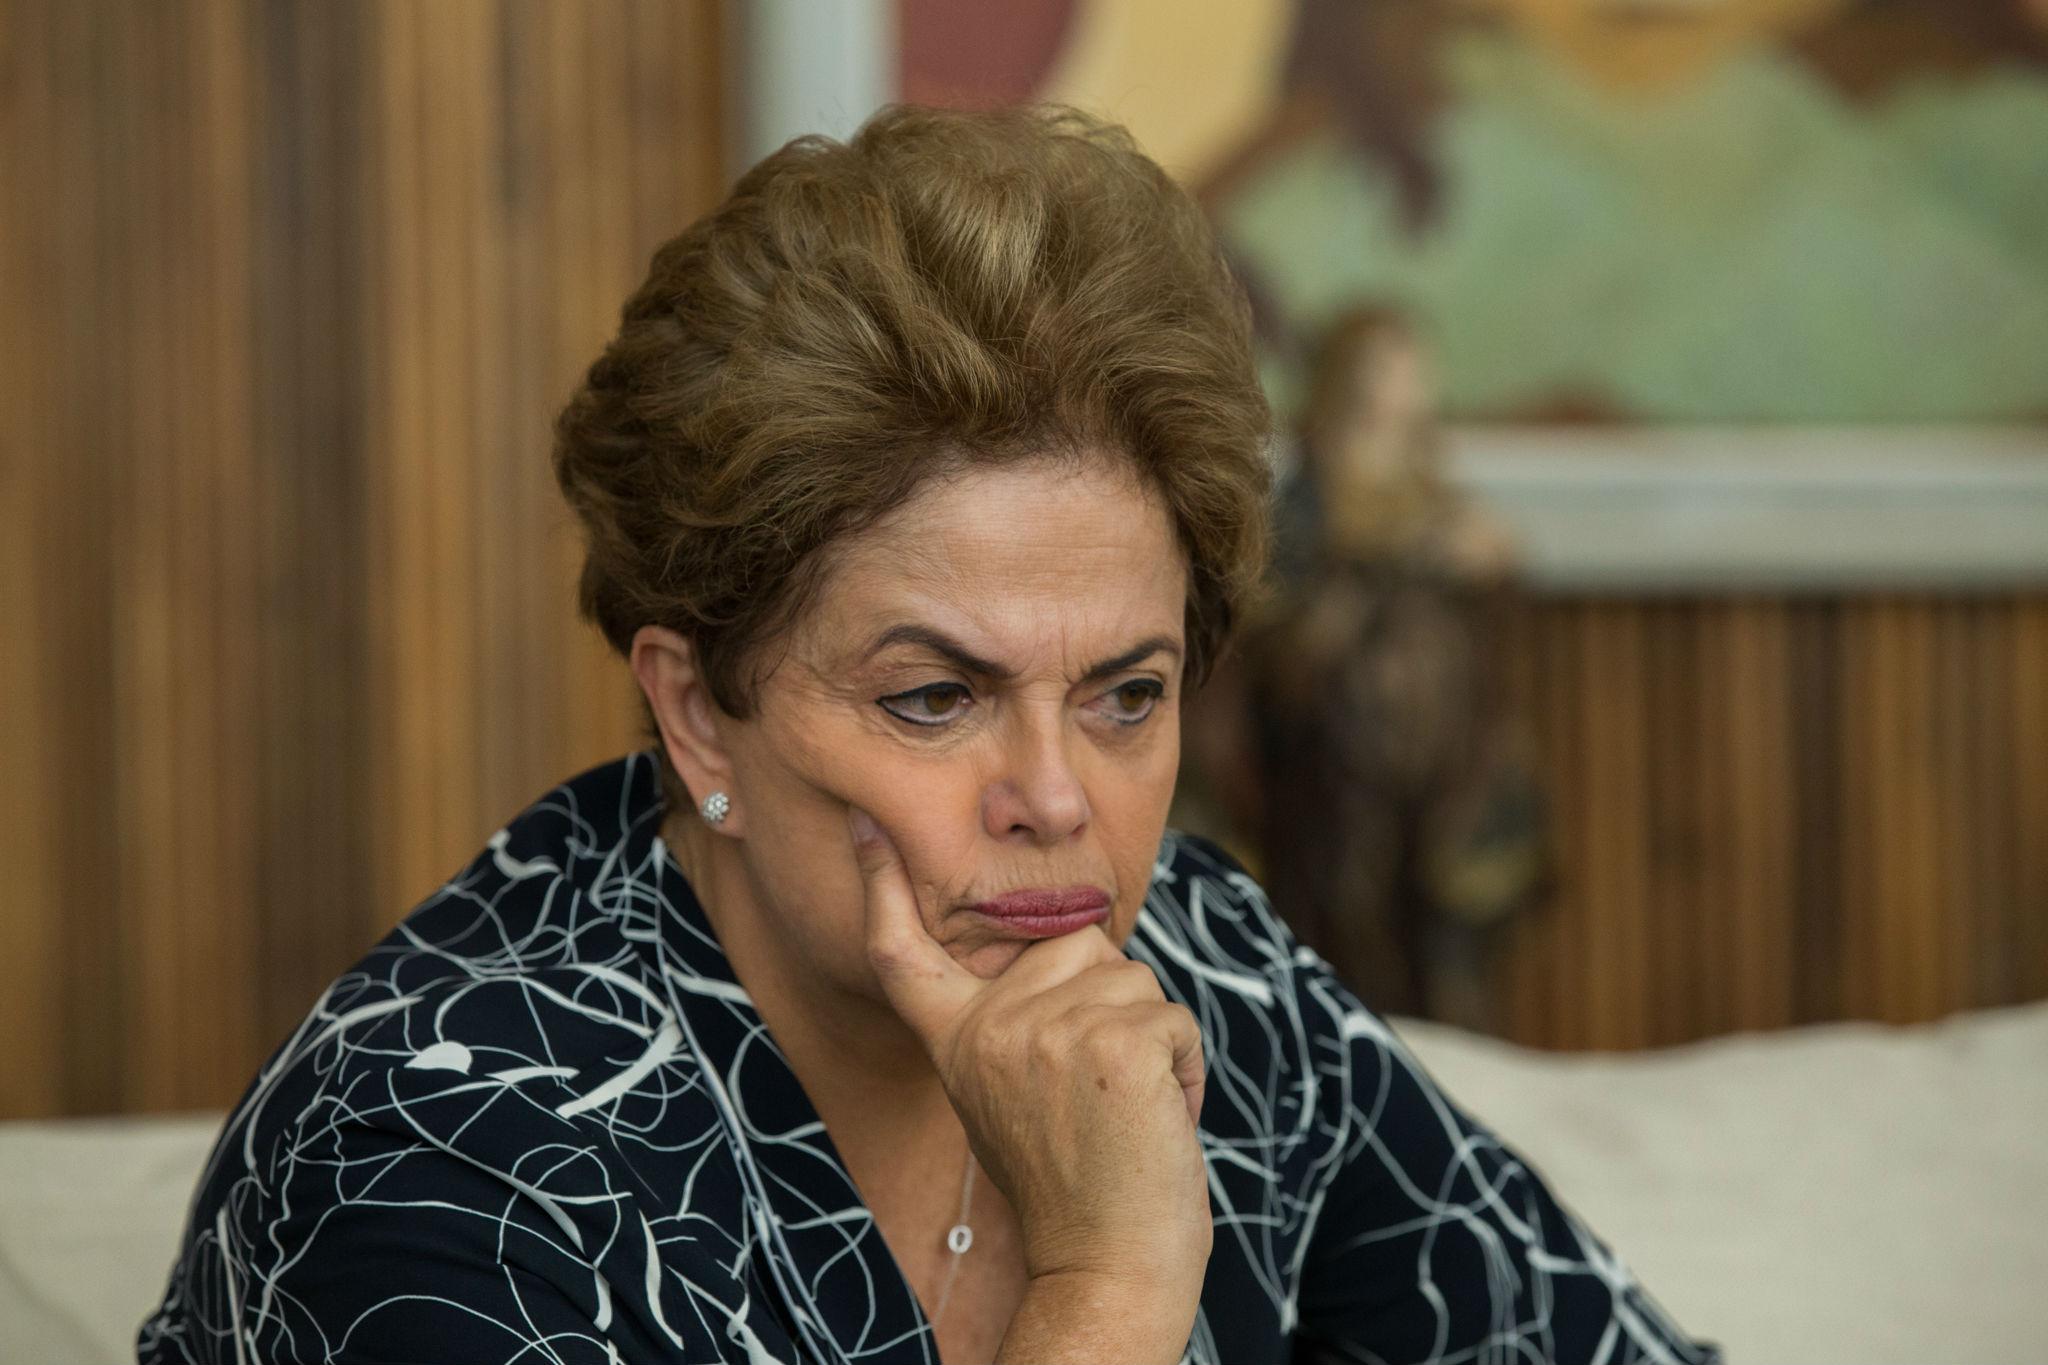 Ms Rousseff was Brazil's first female president